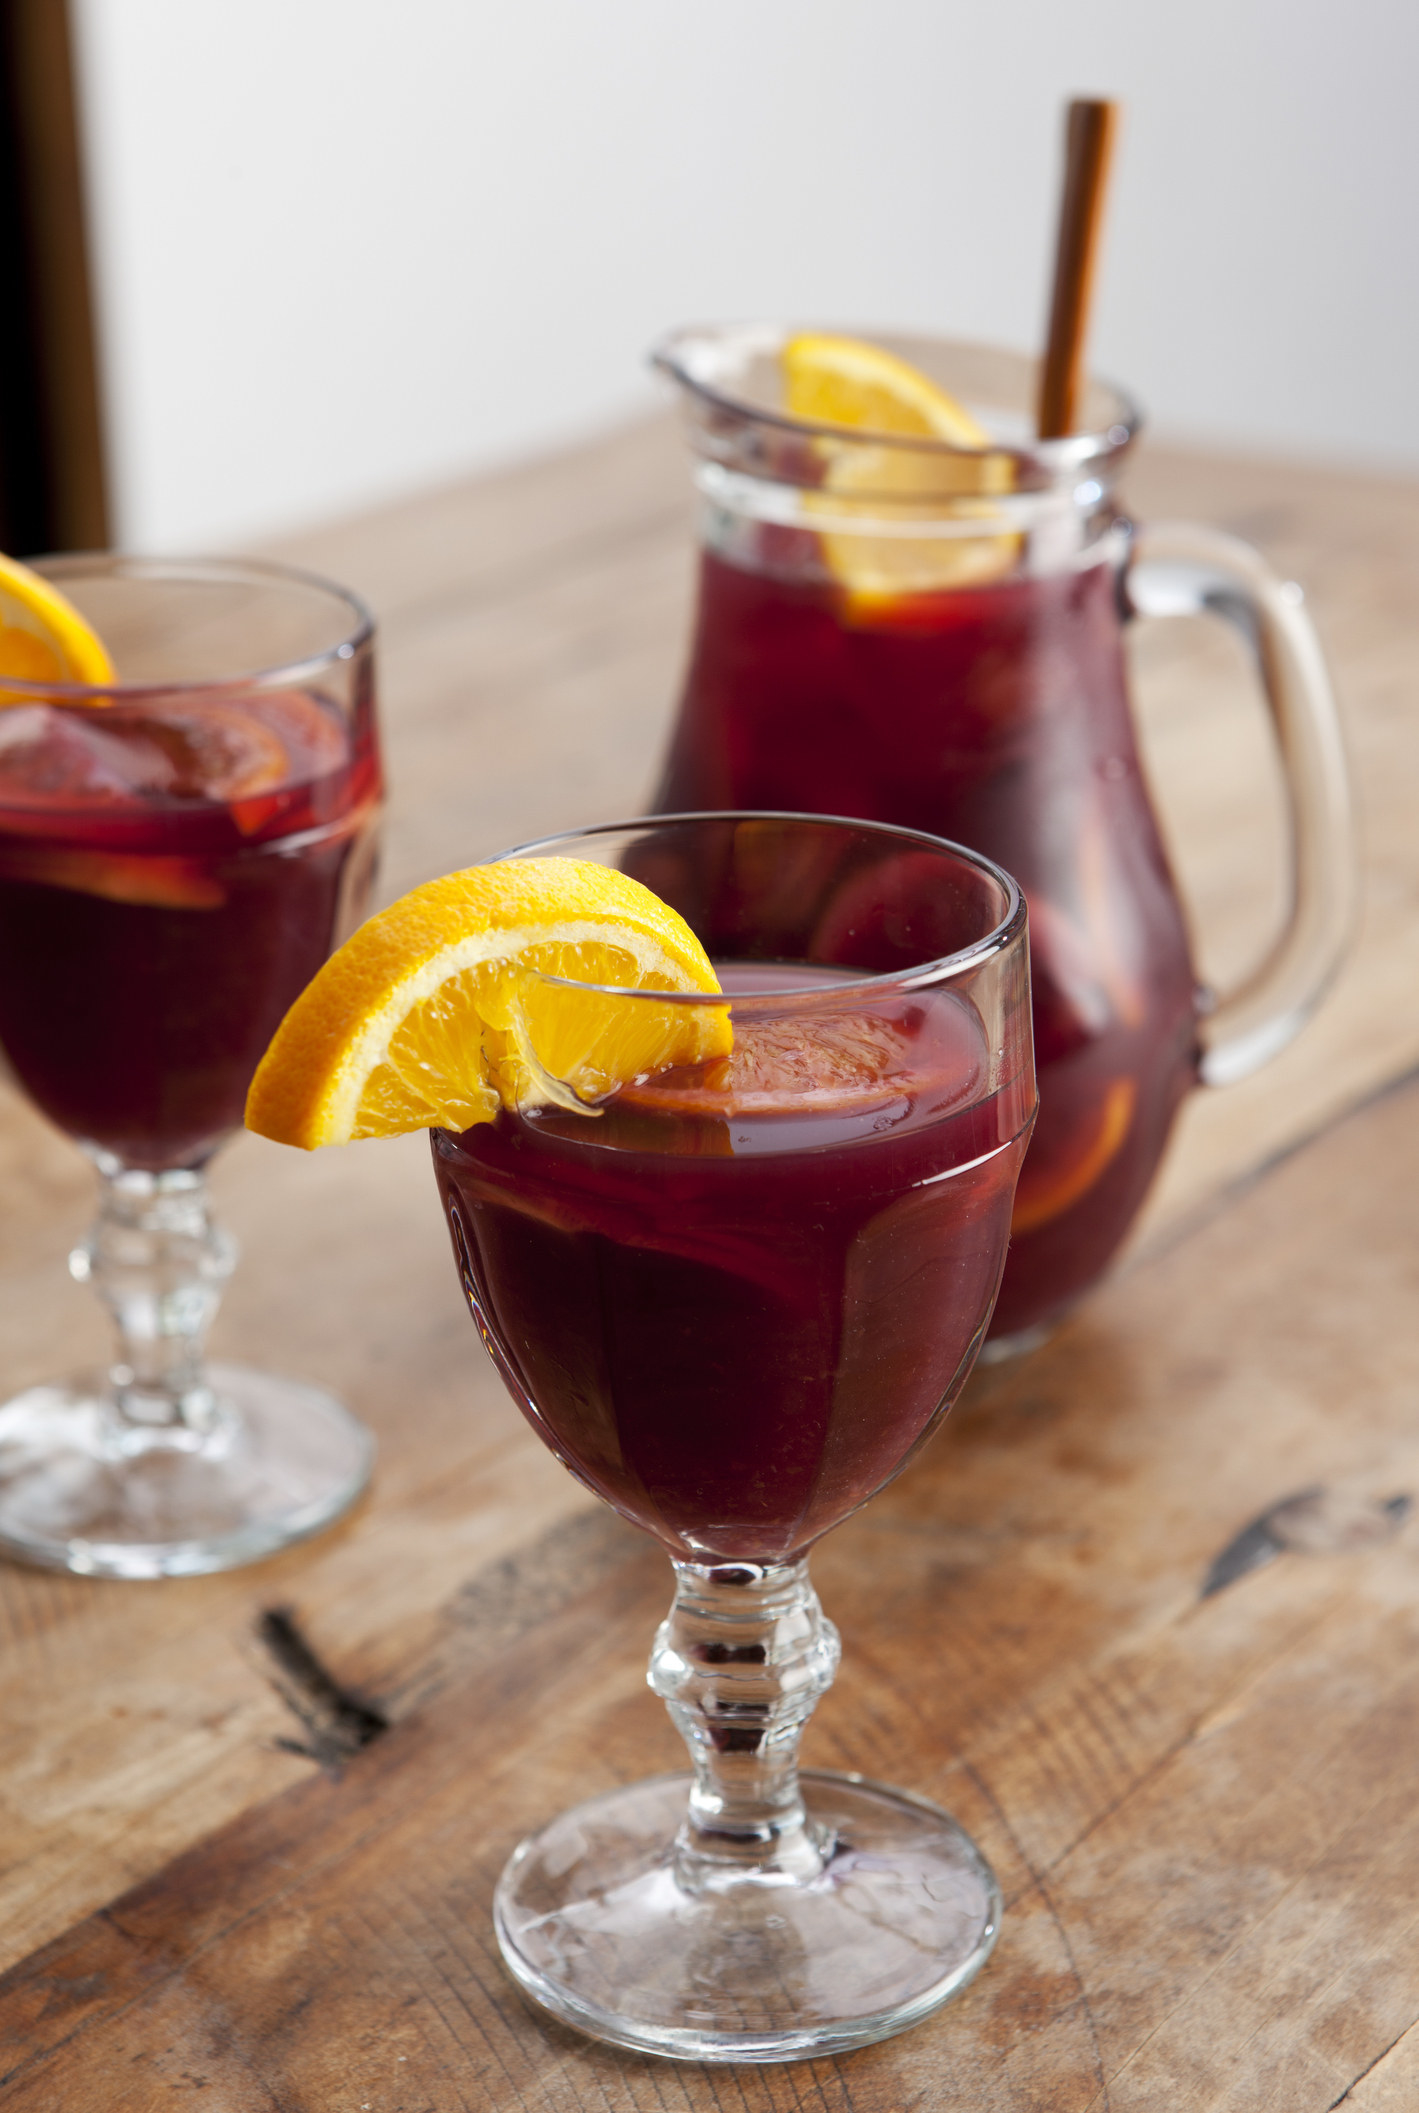 Two glasses of sangria next to a pitcher of Sangria on a wooden table